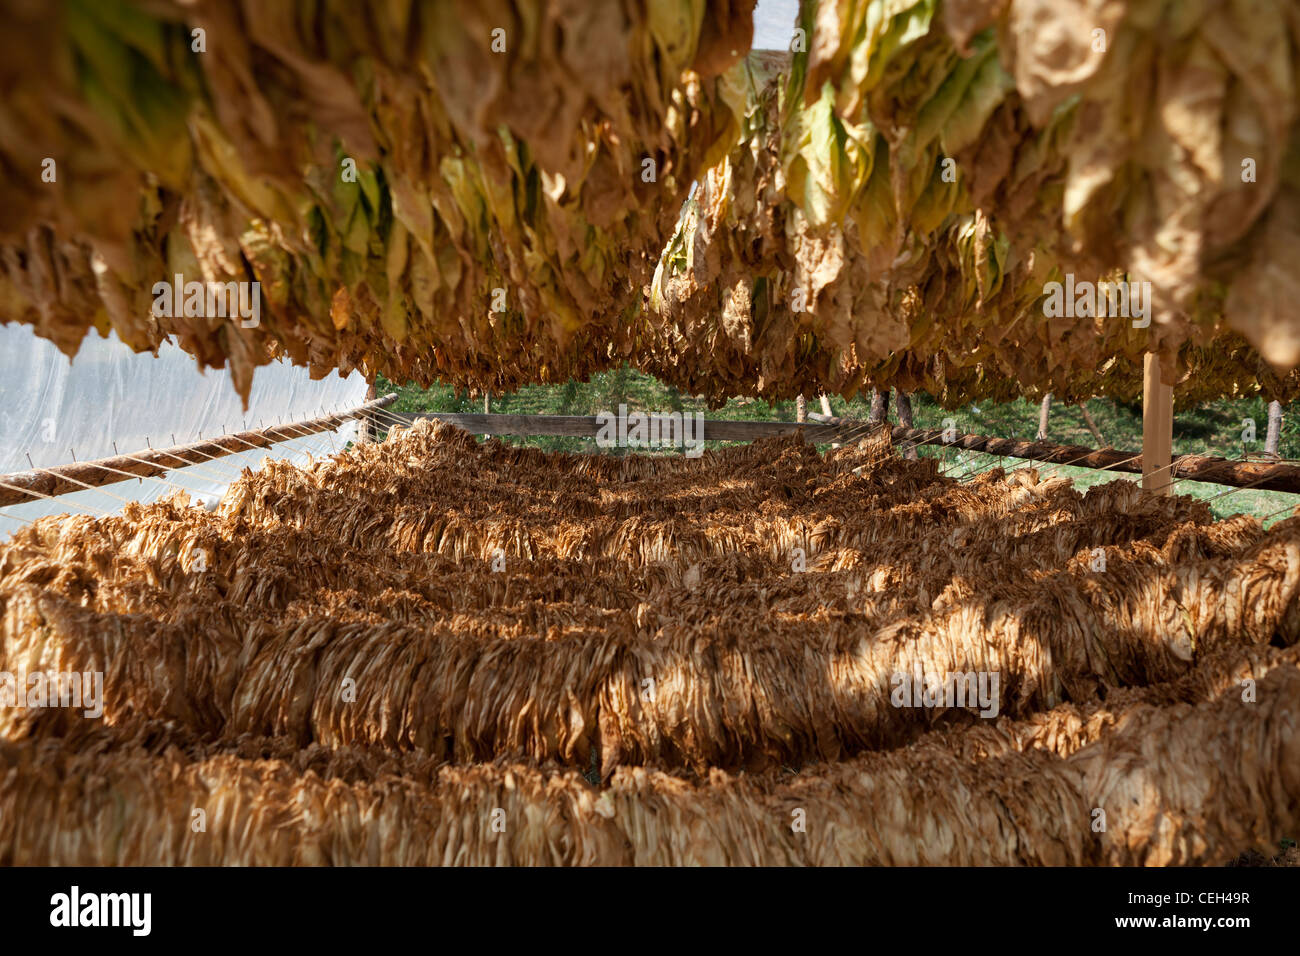 Rows of hand-picked tobacco leaves,drying in the shade Stock Photo